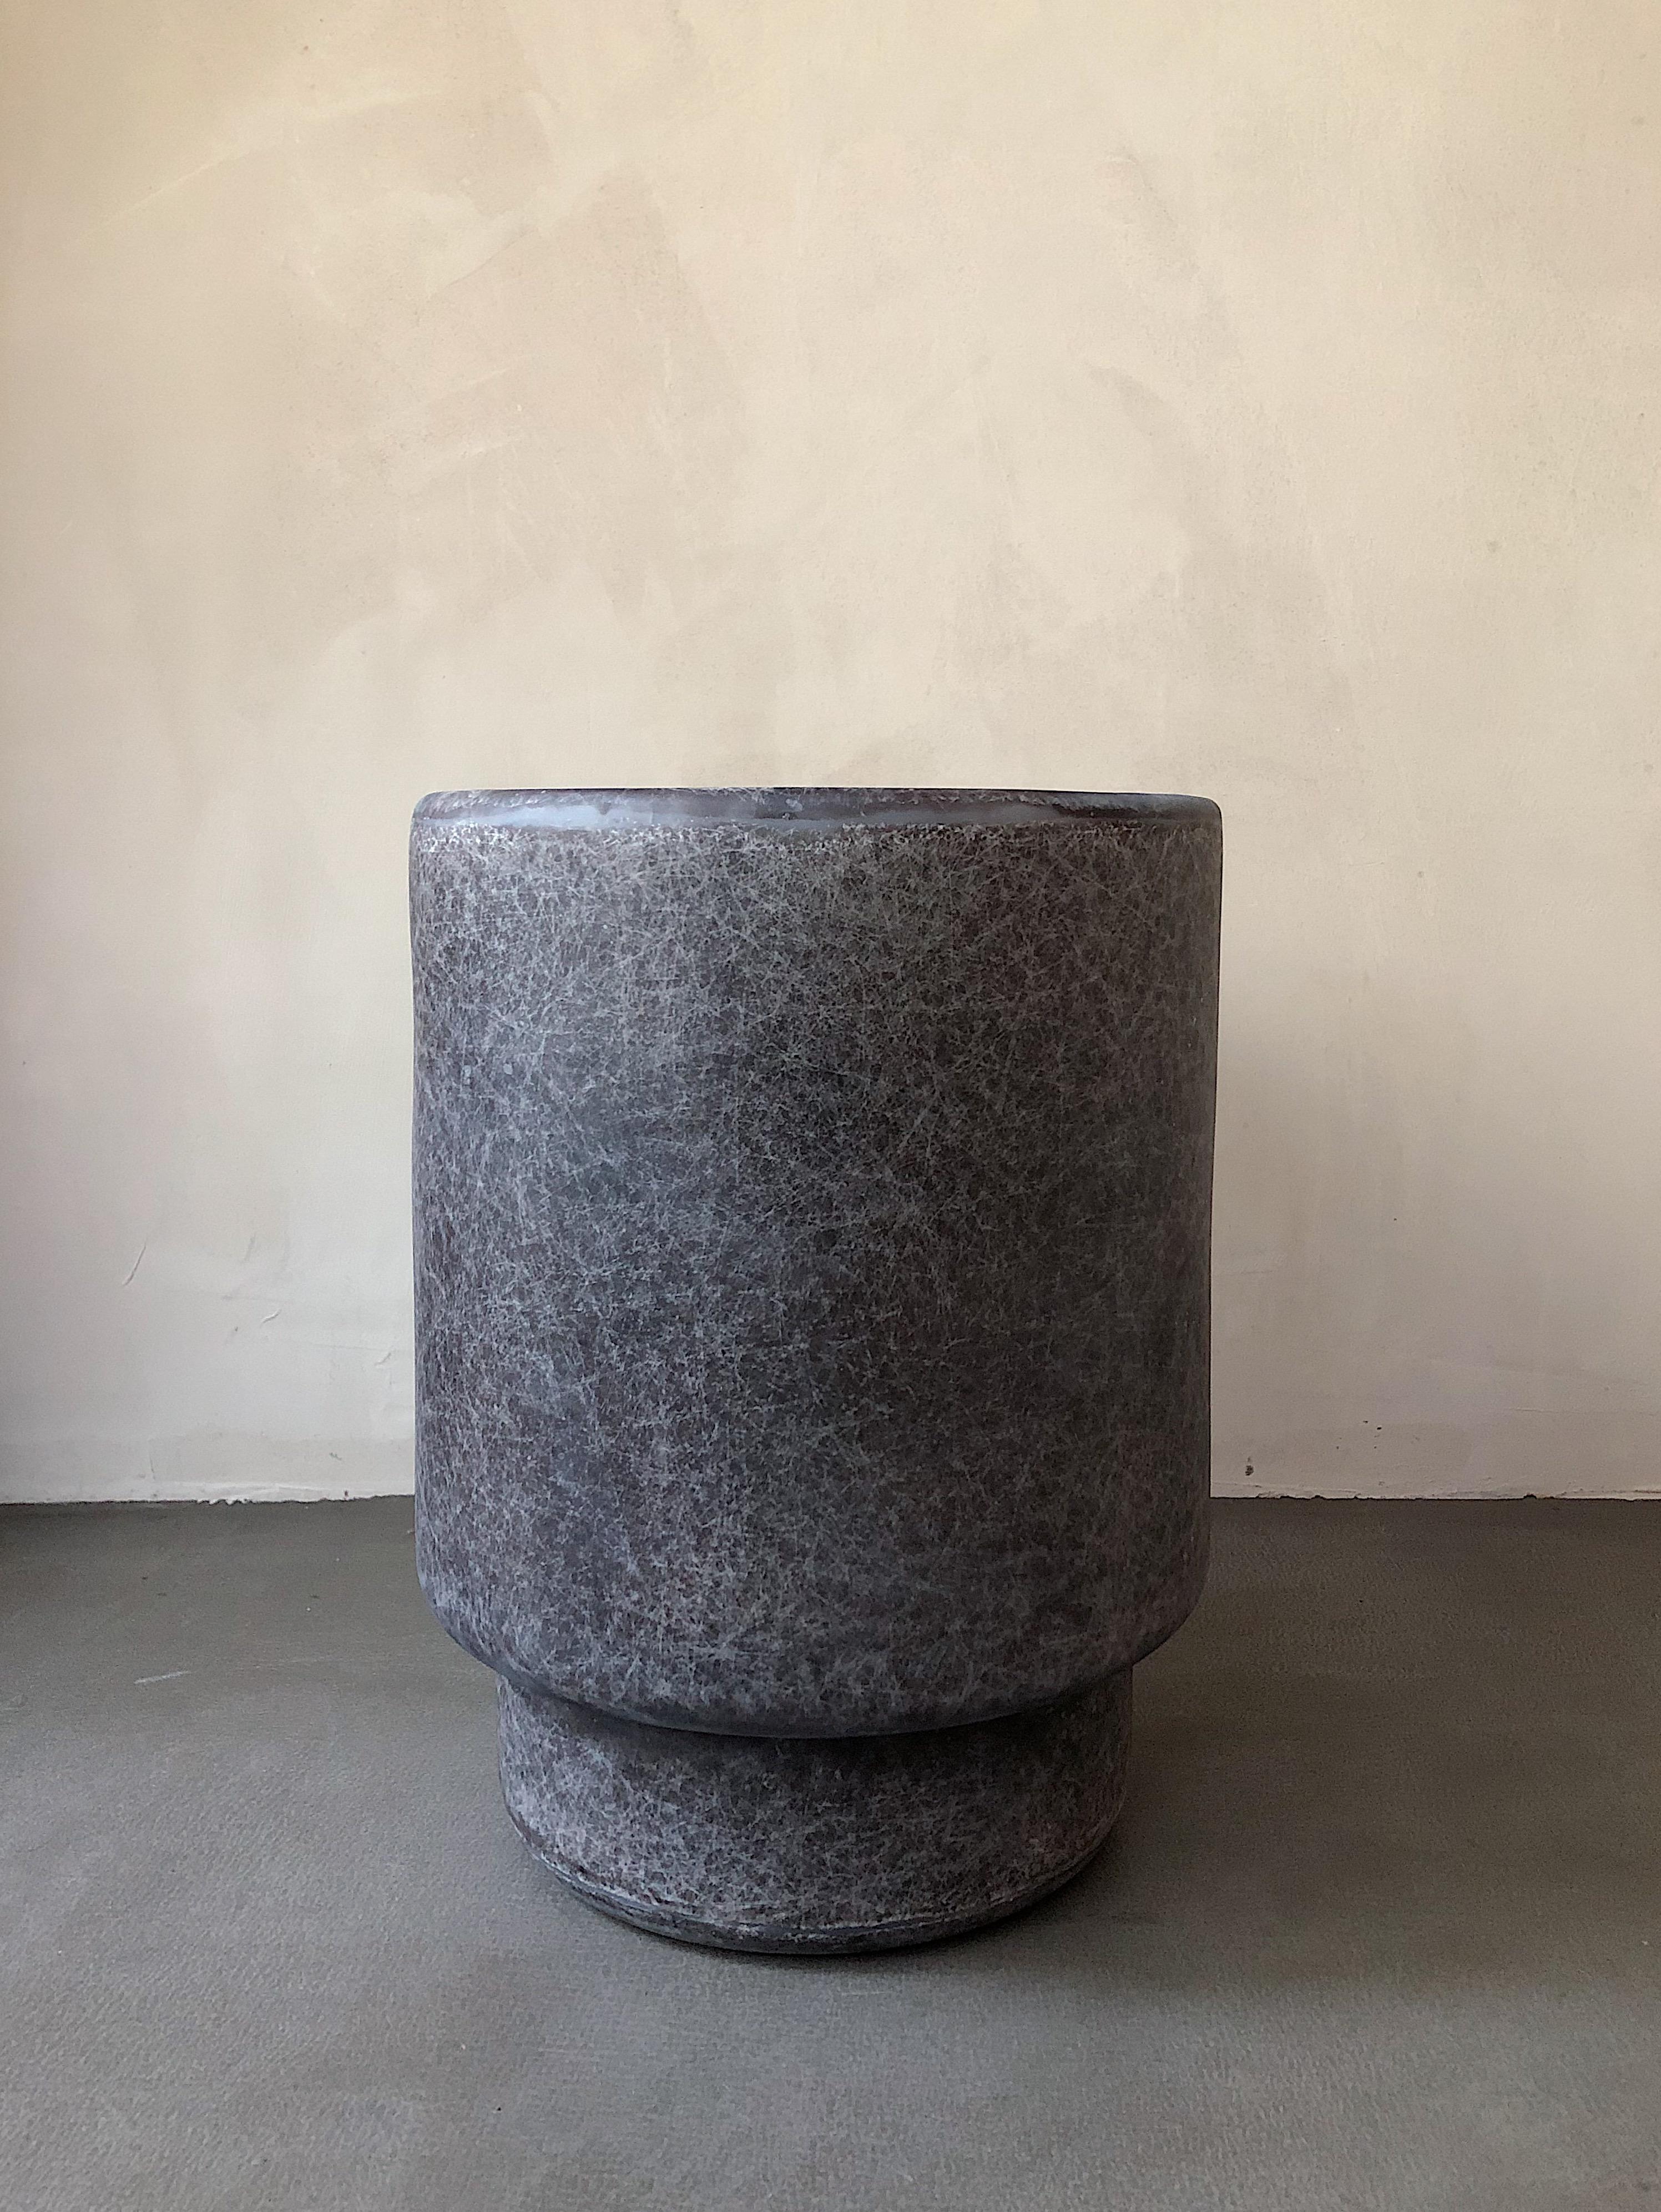 Tong coffee vase by kar
Materials: FRP
Dimensions: 26 x 26 x 34 cm

A smooth shape for integrating into any space. Multiple-use as a flower vase, a container for blueprints, posters, or as it originally designed for, a trash bin.

Kar- is the root